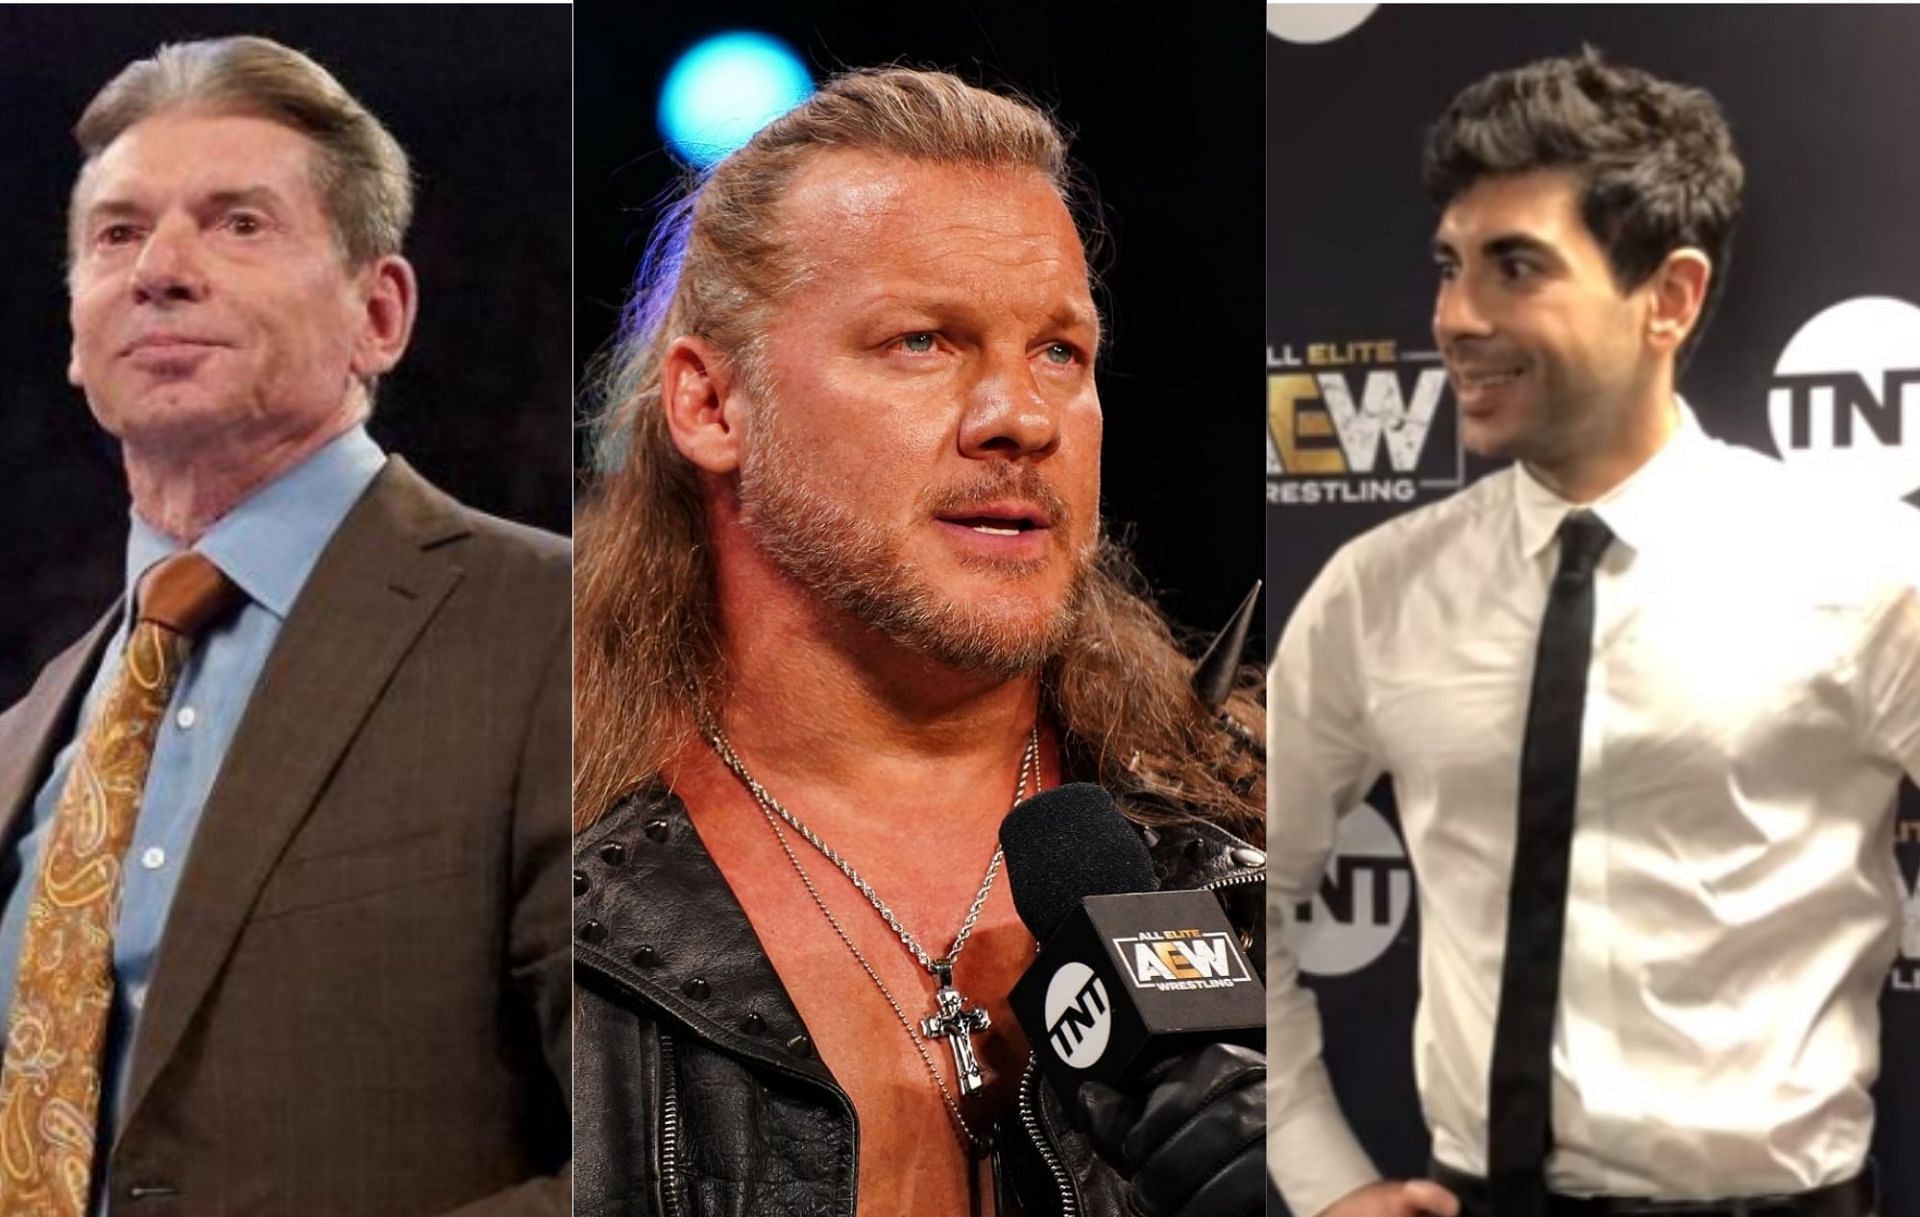 What is next for Chris Jericho?